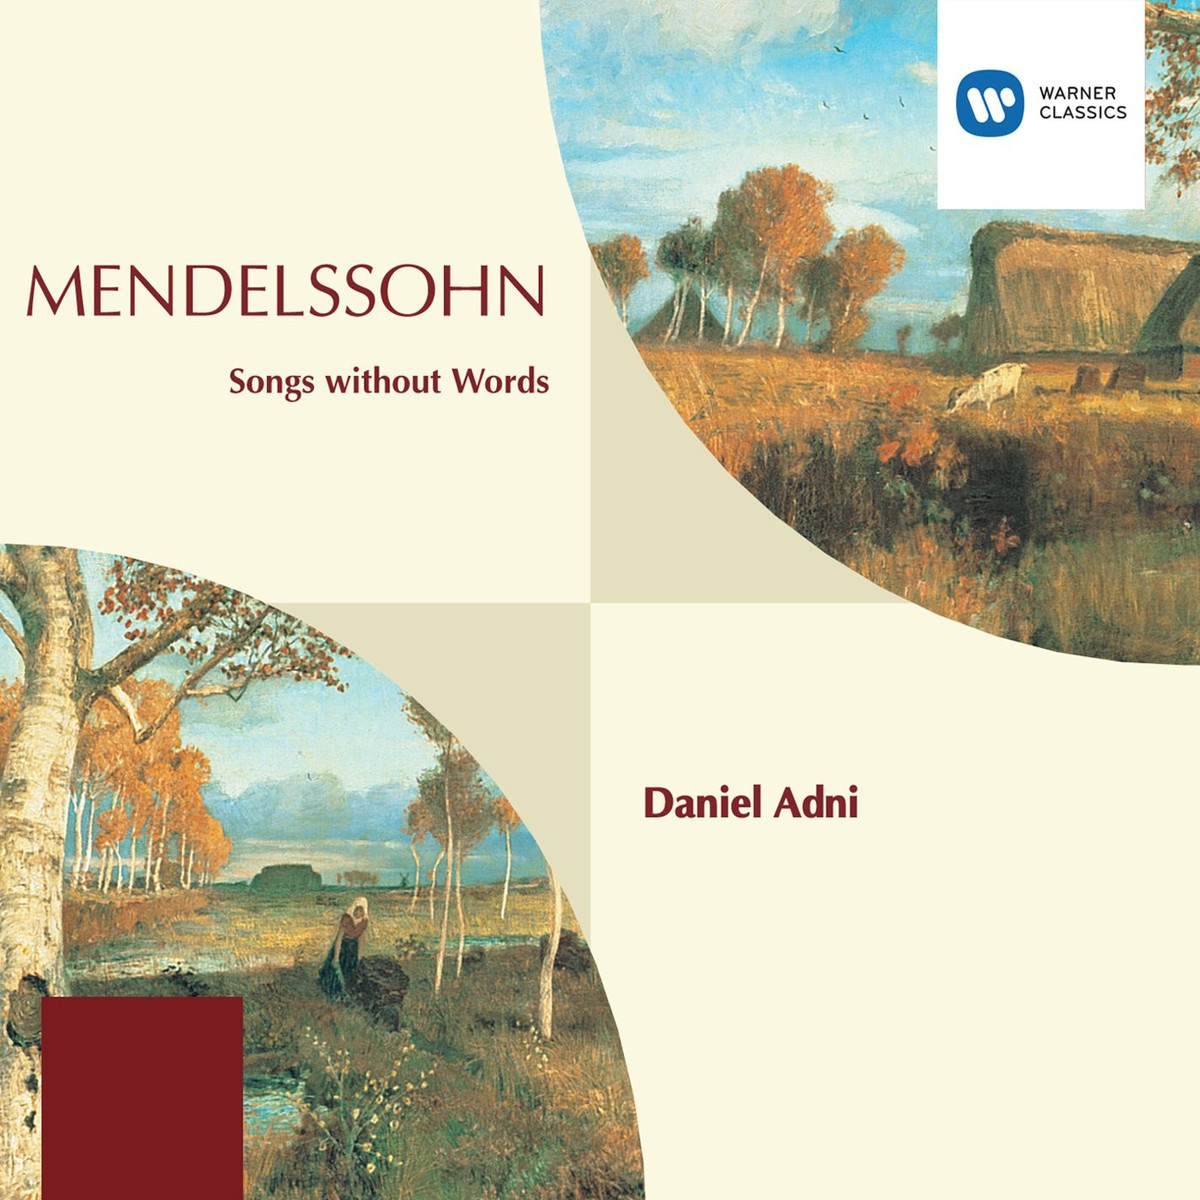 Songs without Words (1996 Digital Remaster): Allegretto in F sharp minor,  Op. 30 No. 6, 'Venetian Gondola Song'